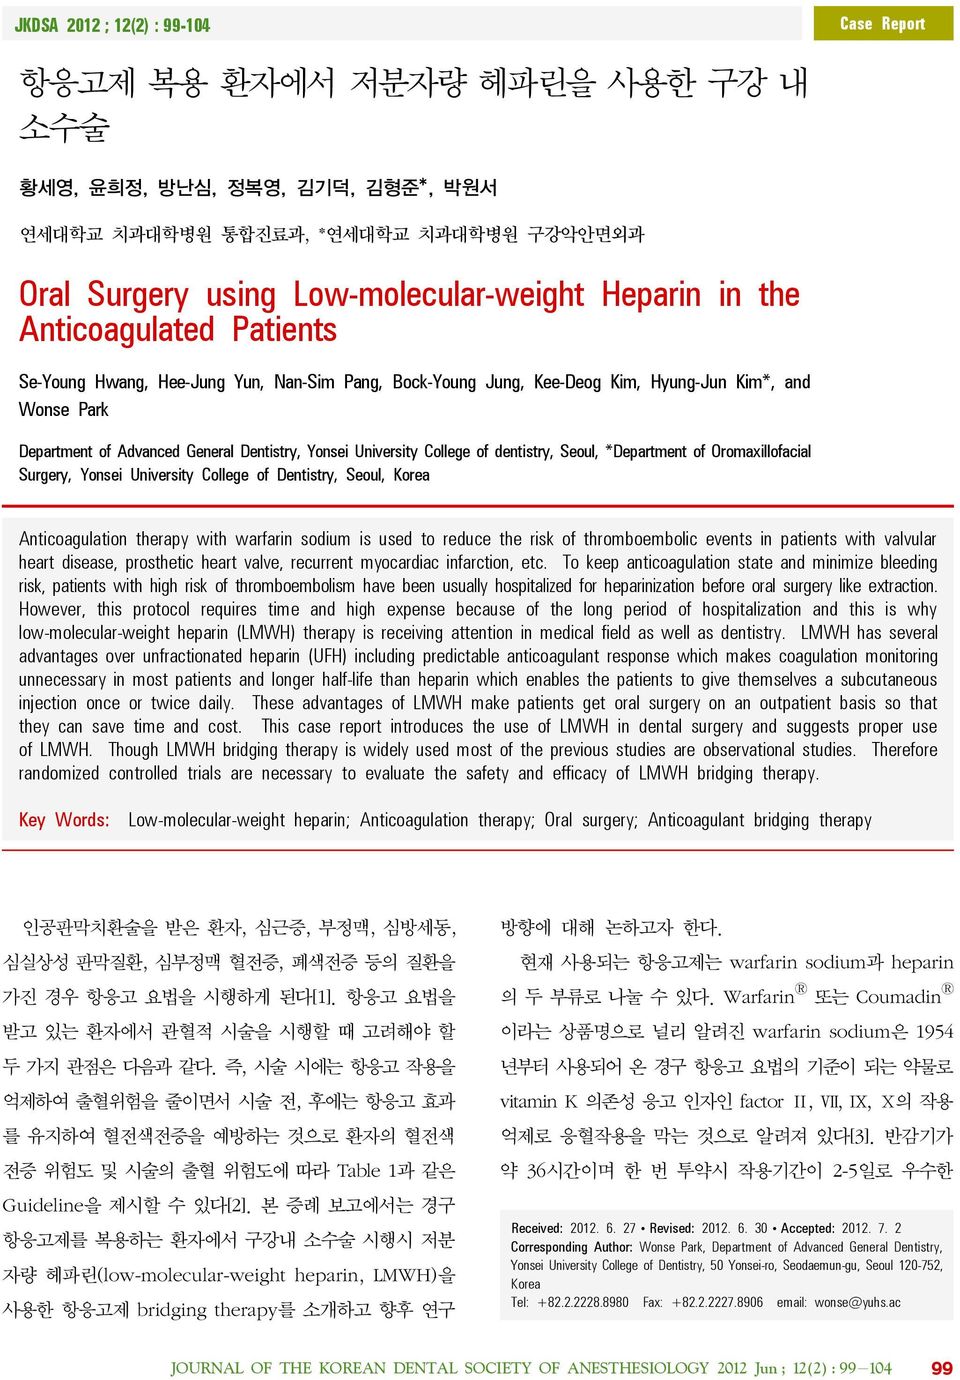 *Department of Oromaxillofacial Surgery, Yonsei University College of Dentistry, Seoul, Korea Anticoagulation therapy with warfarin sodium is used to reduce the risk of thromboembolic events in